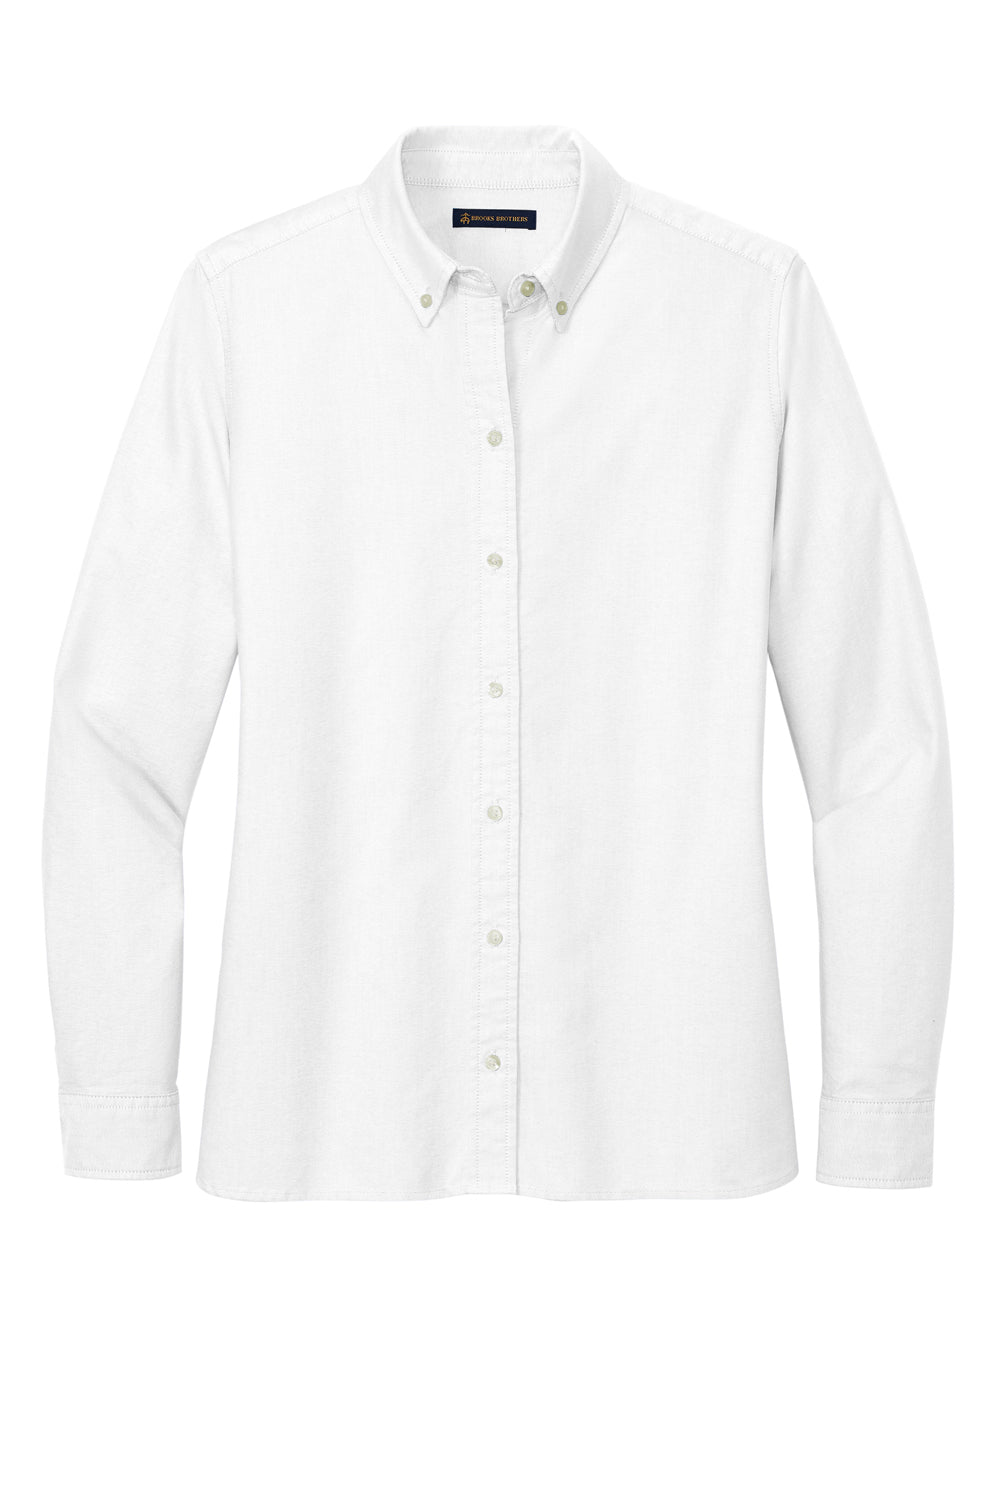 Brooks Brothers Womens Casual Oxford Long Sleeve Button Down Shirt White Flat Front